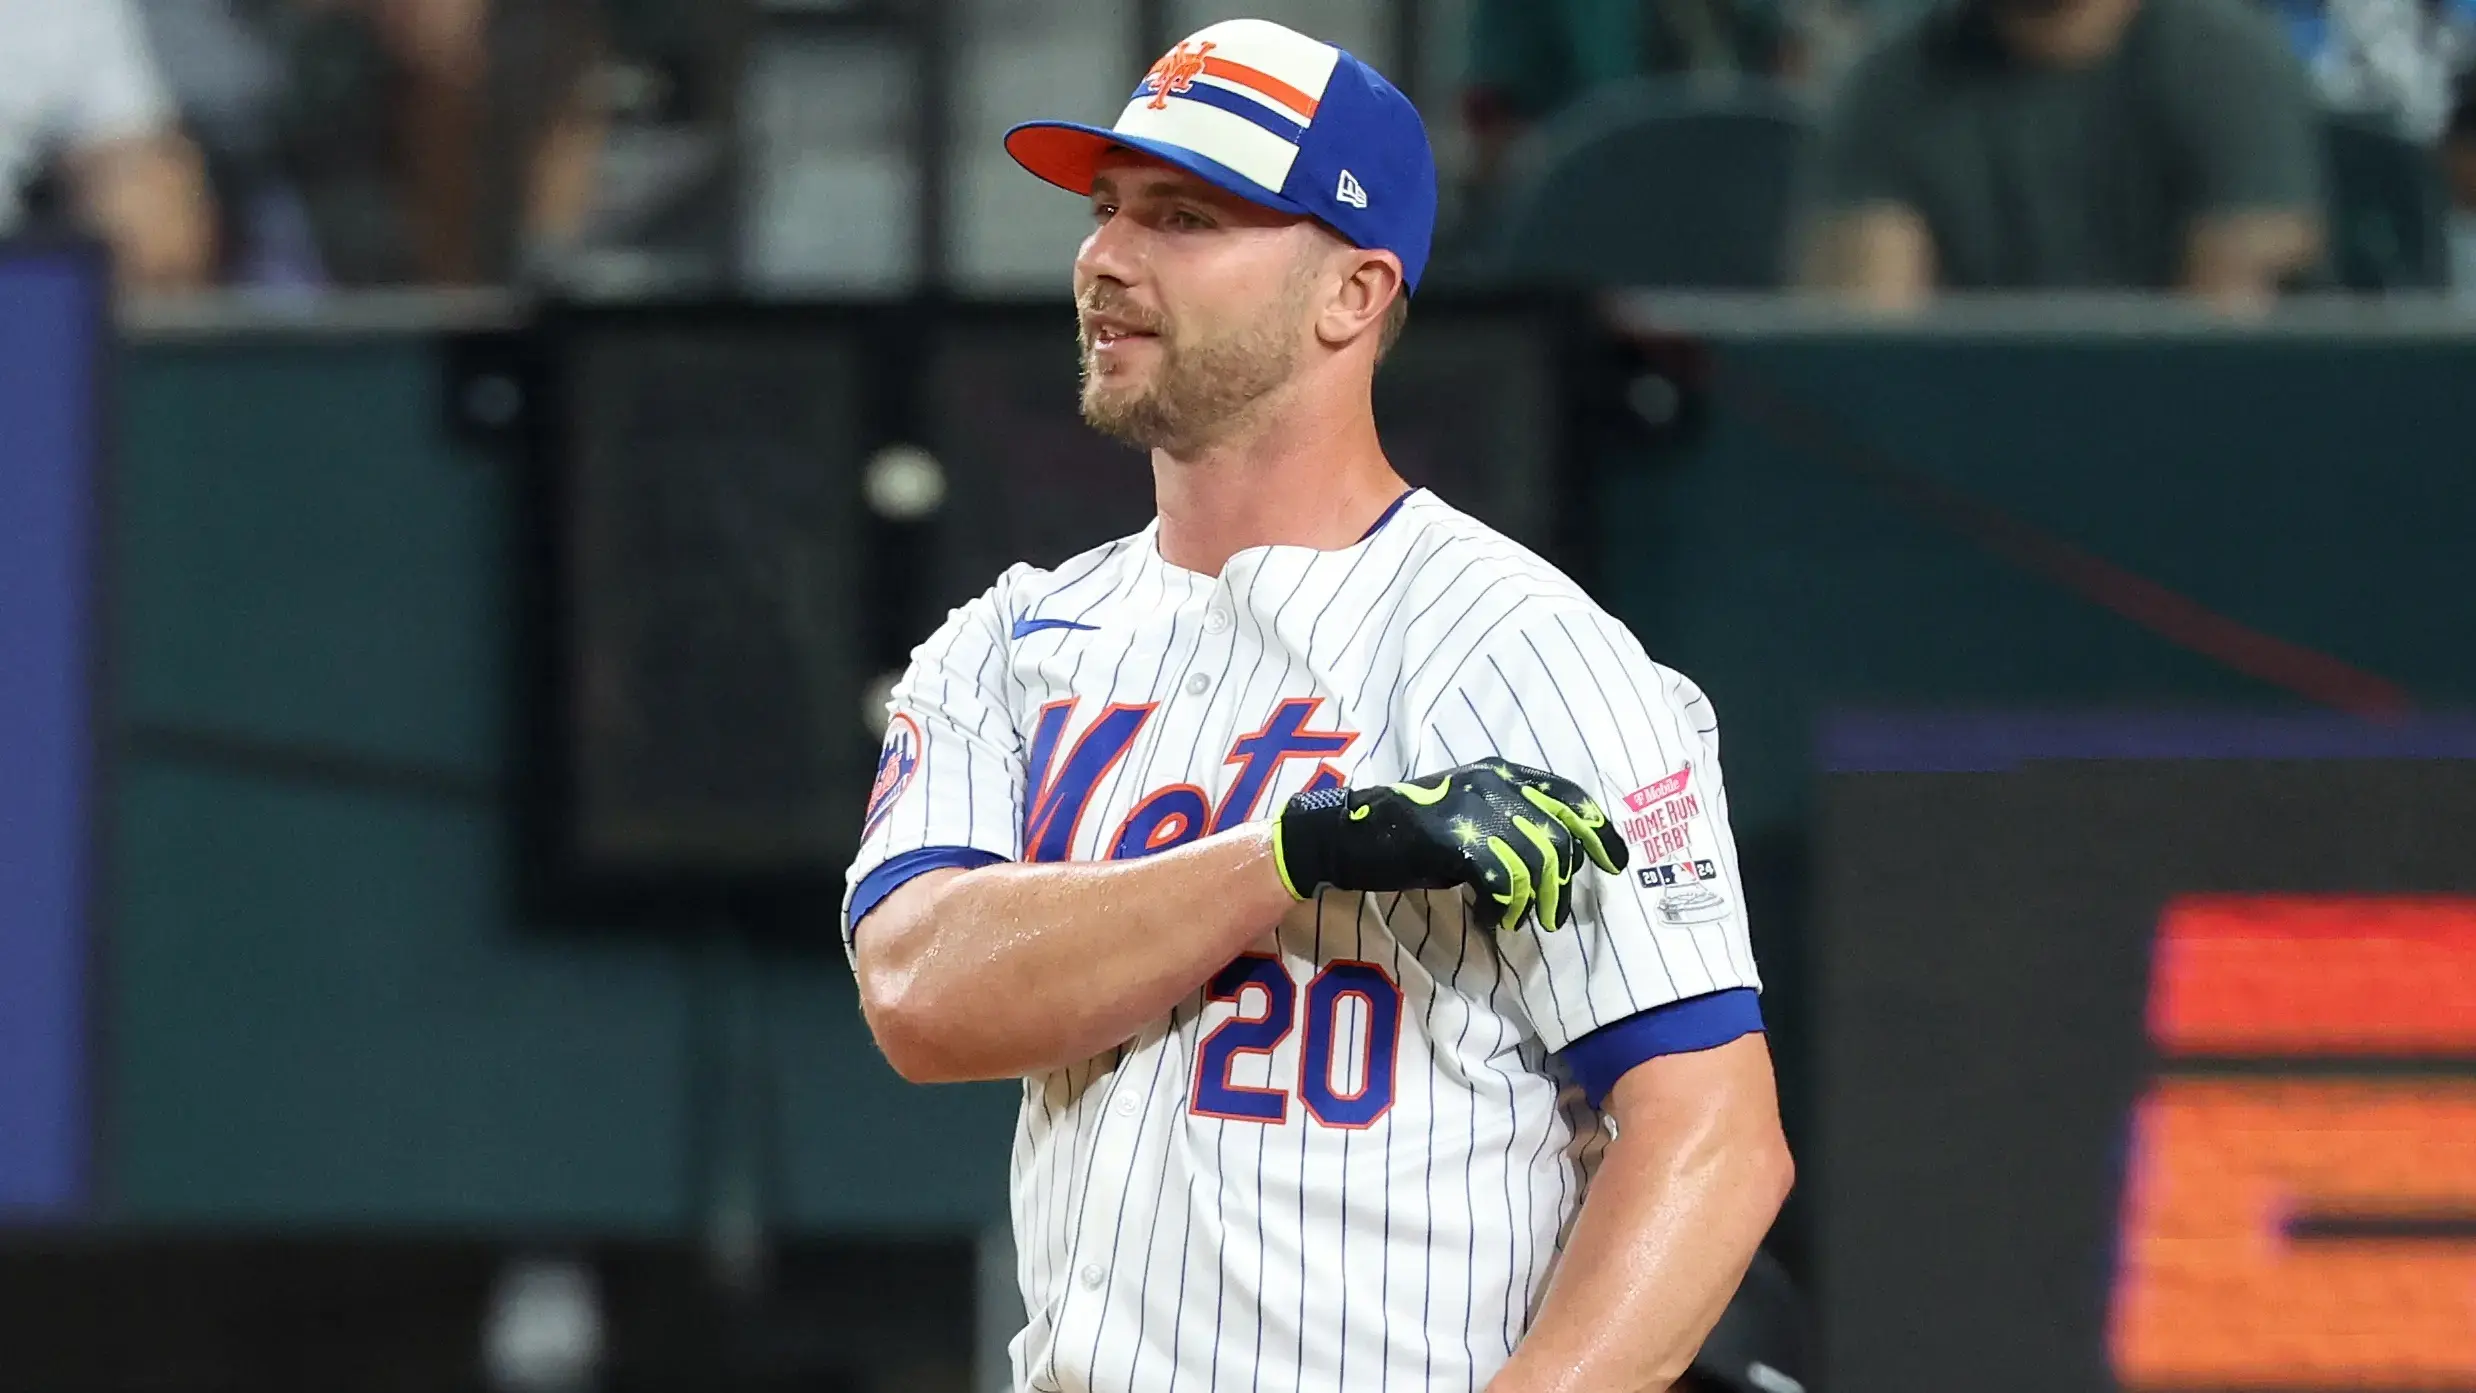 Mets’ Pete Alonso open to competing in another Home Run Derby: ‘There’s definitely more in there’